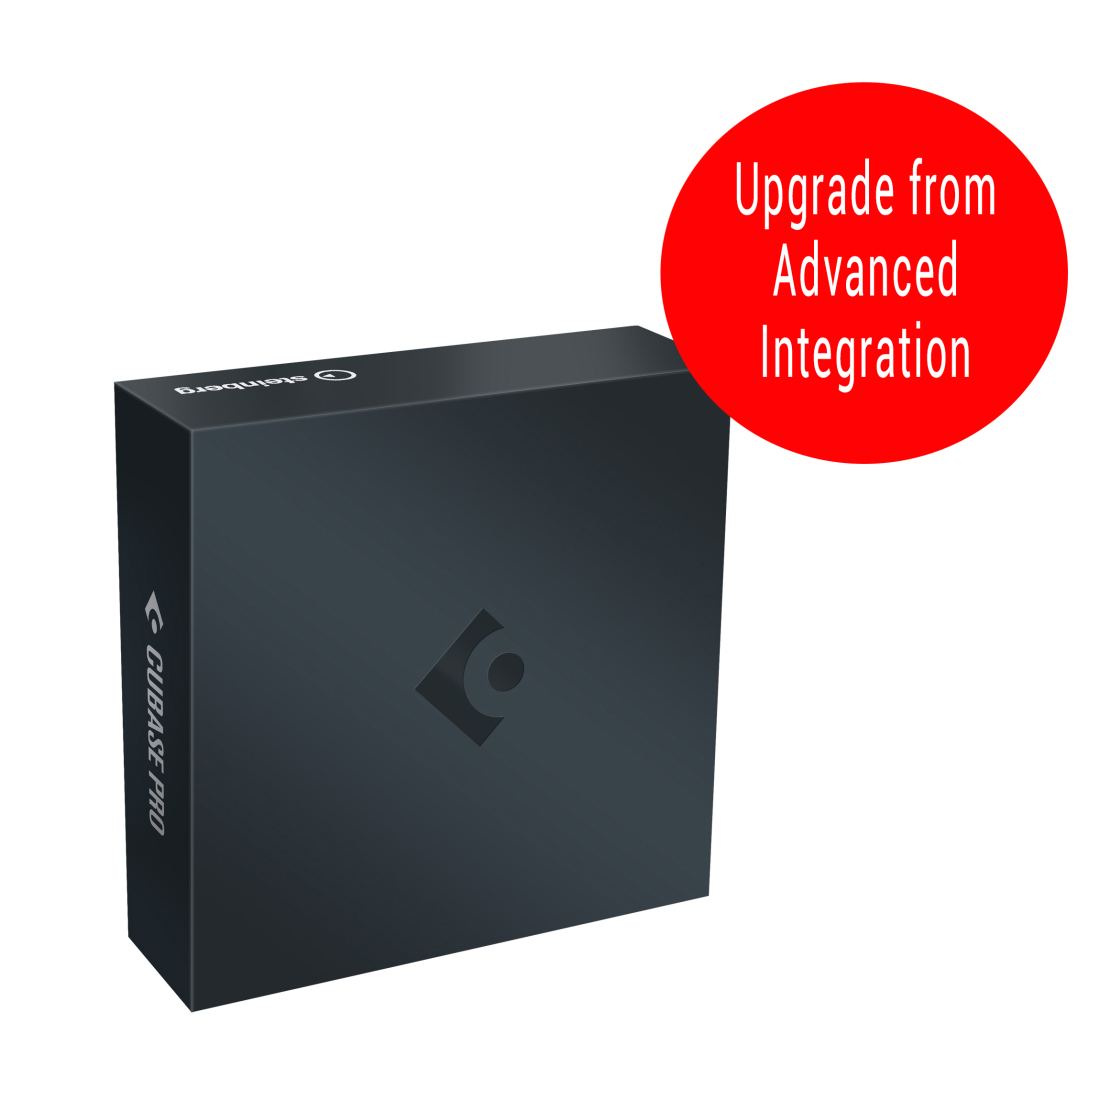 Cubase Pro 12 (Boxed) - Upgrade from Advanced Integration